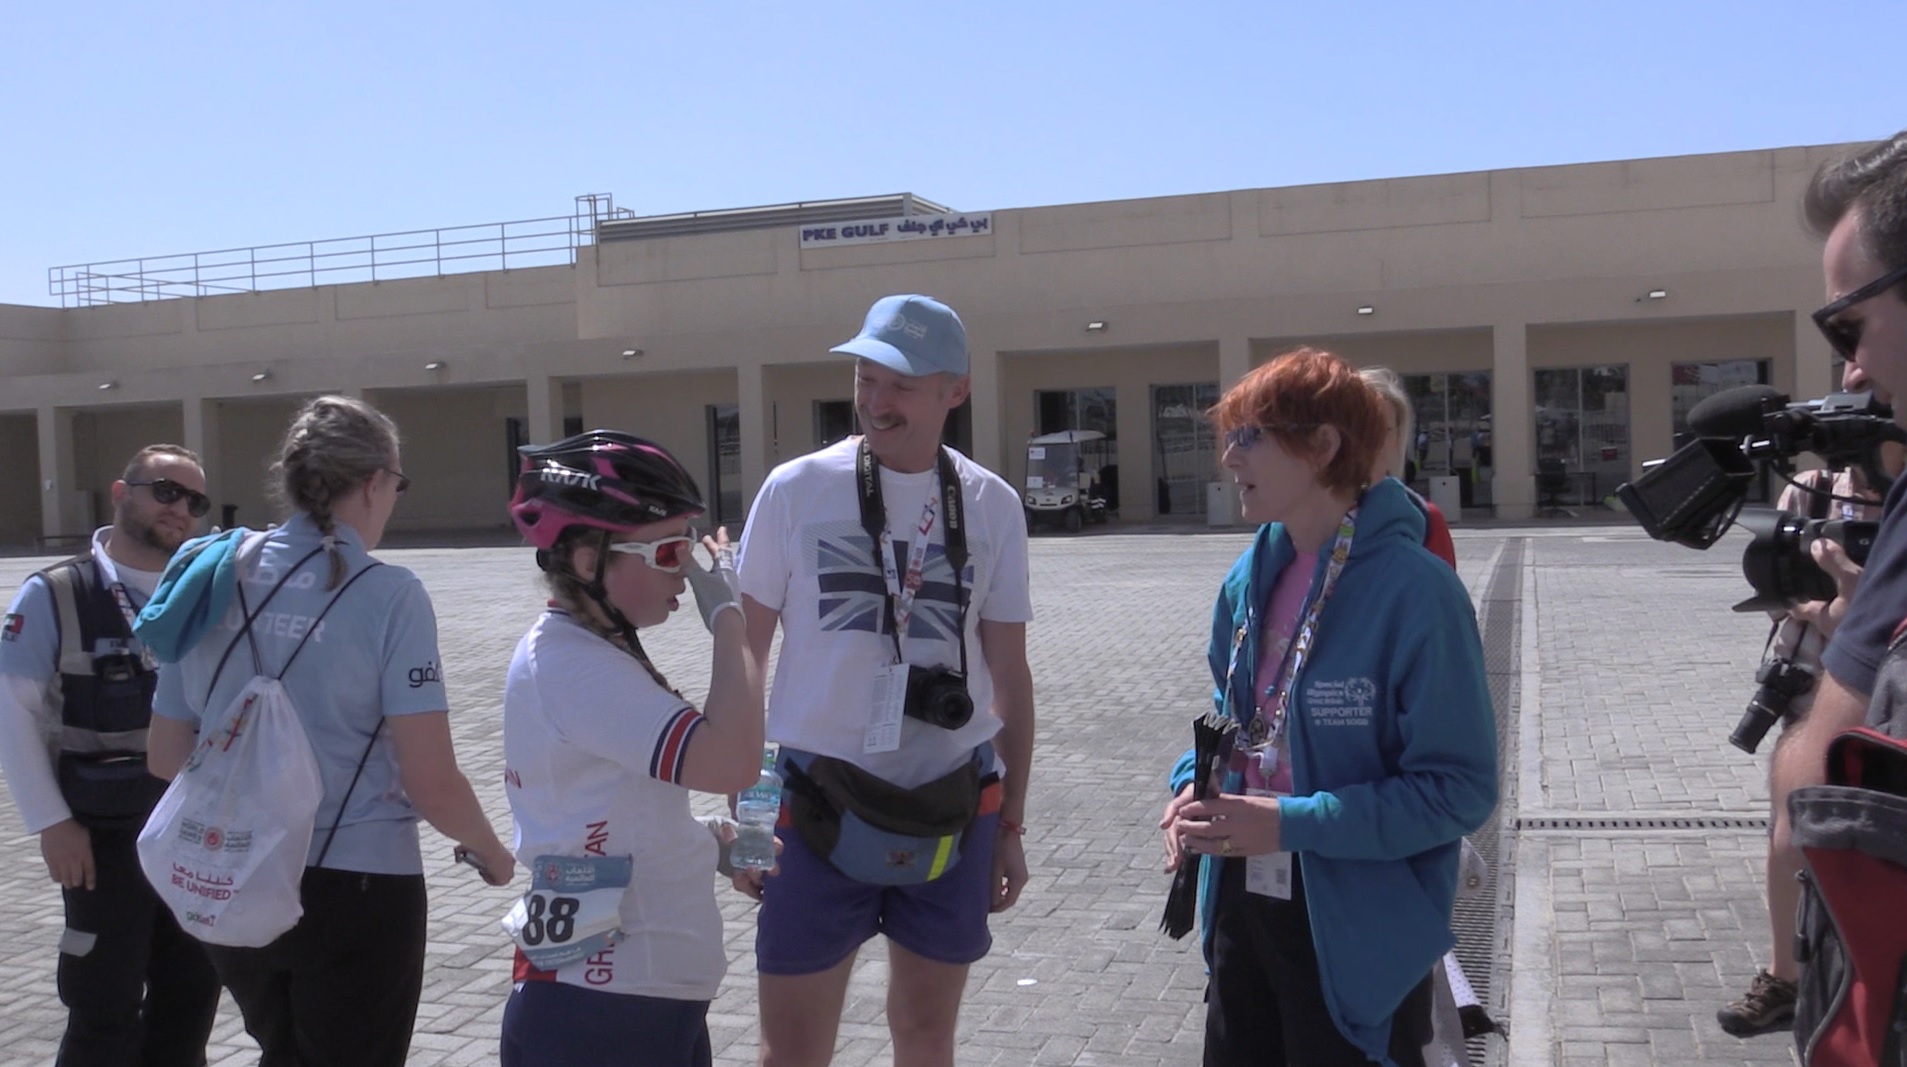 Kiera Byland talks to her parents after her final race at the 2019 World Games